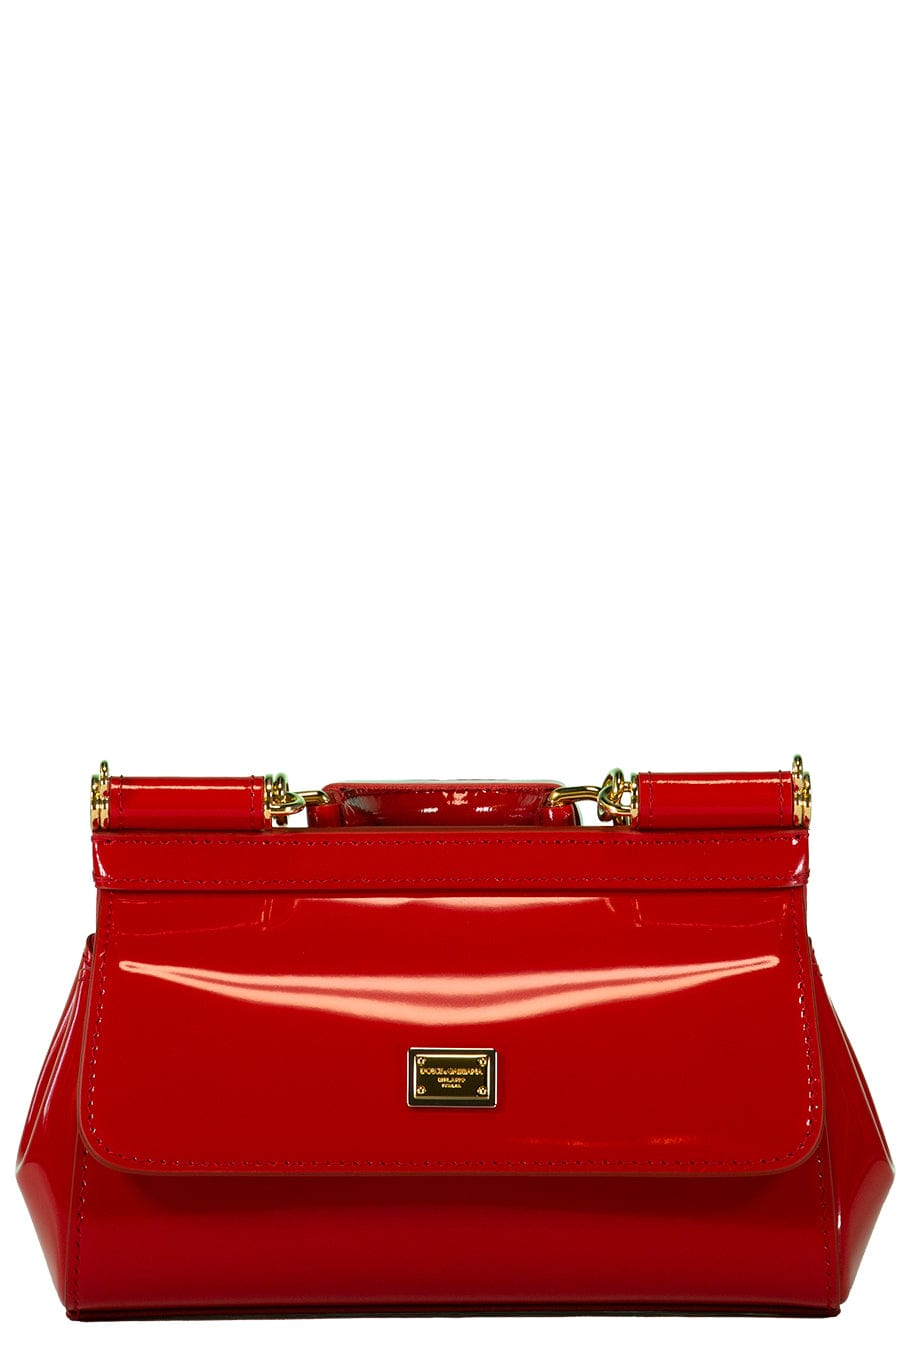 DOLCE & GABBANA-Small Patent Leather Sicily Bag-ROSSO